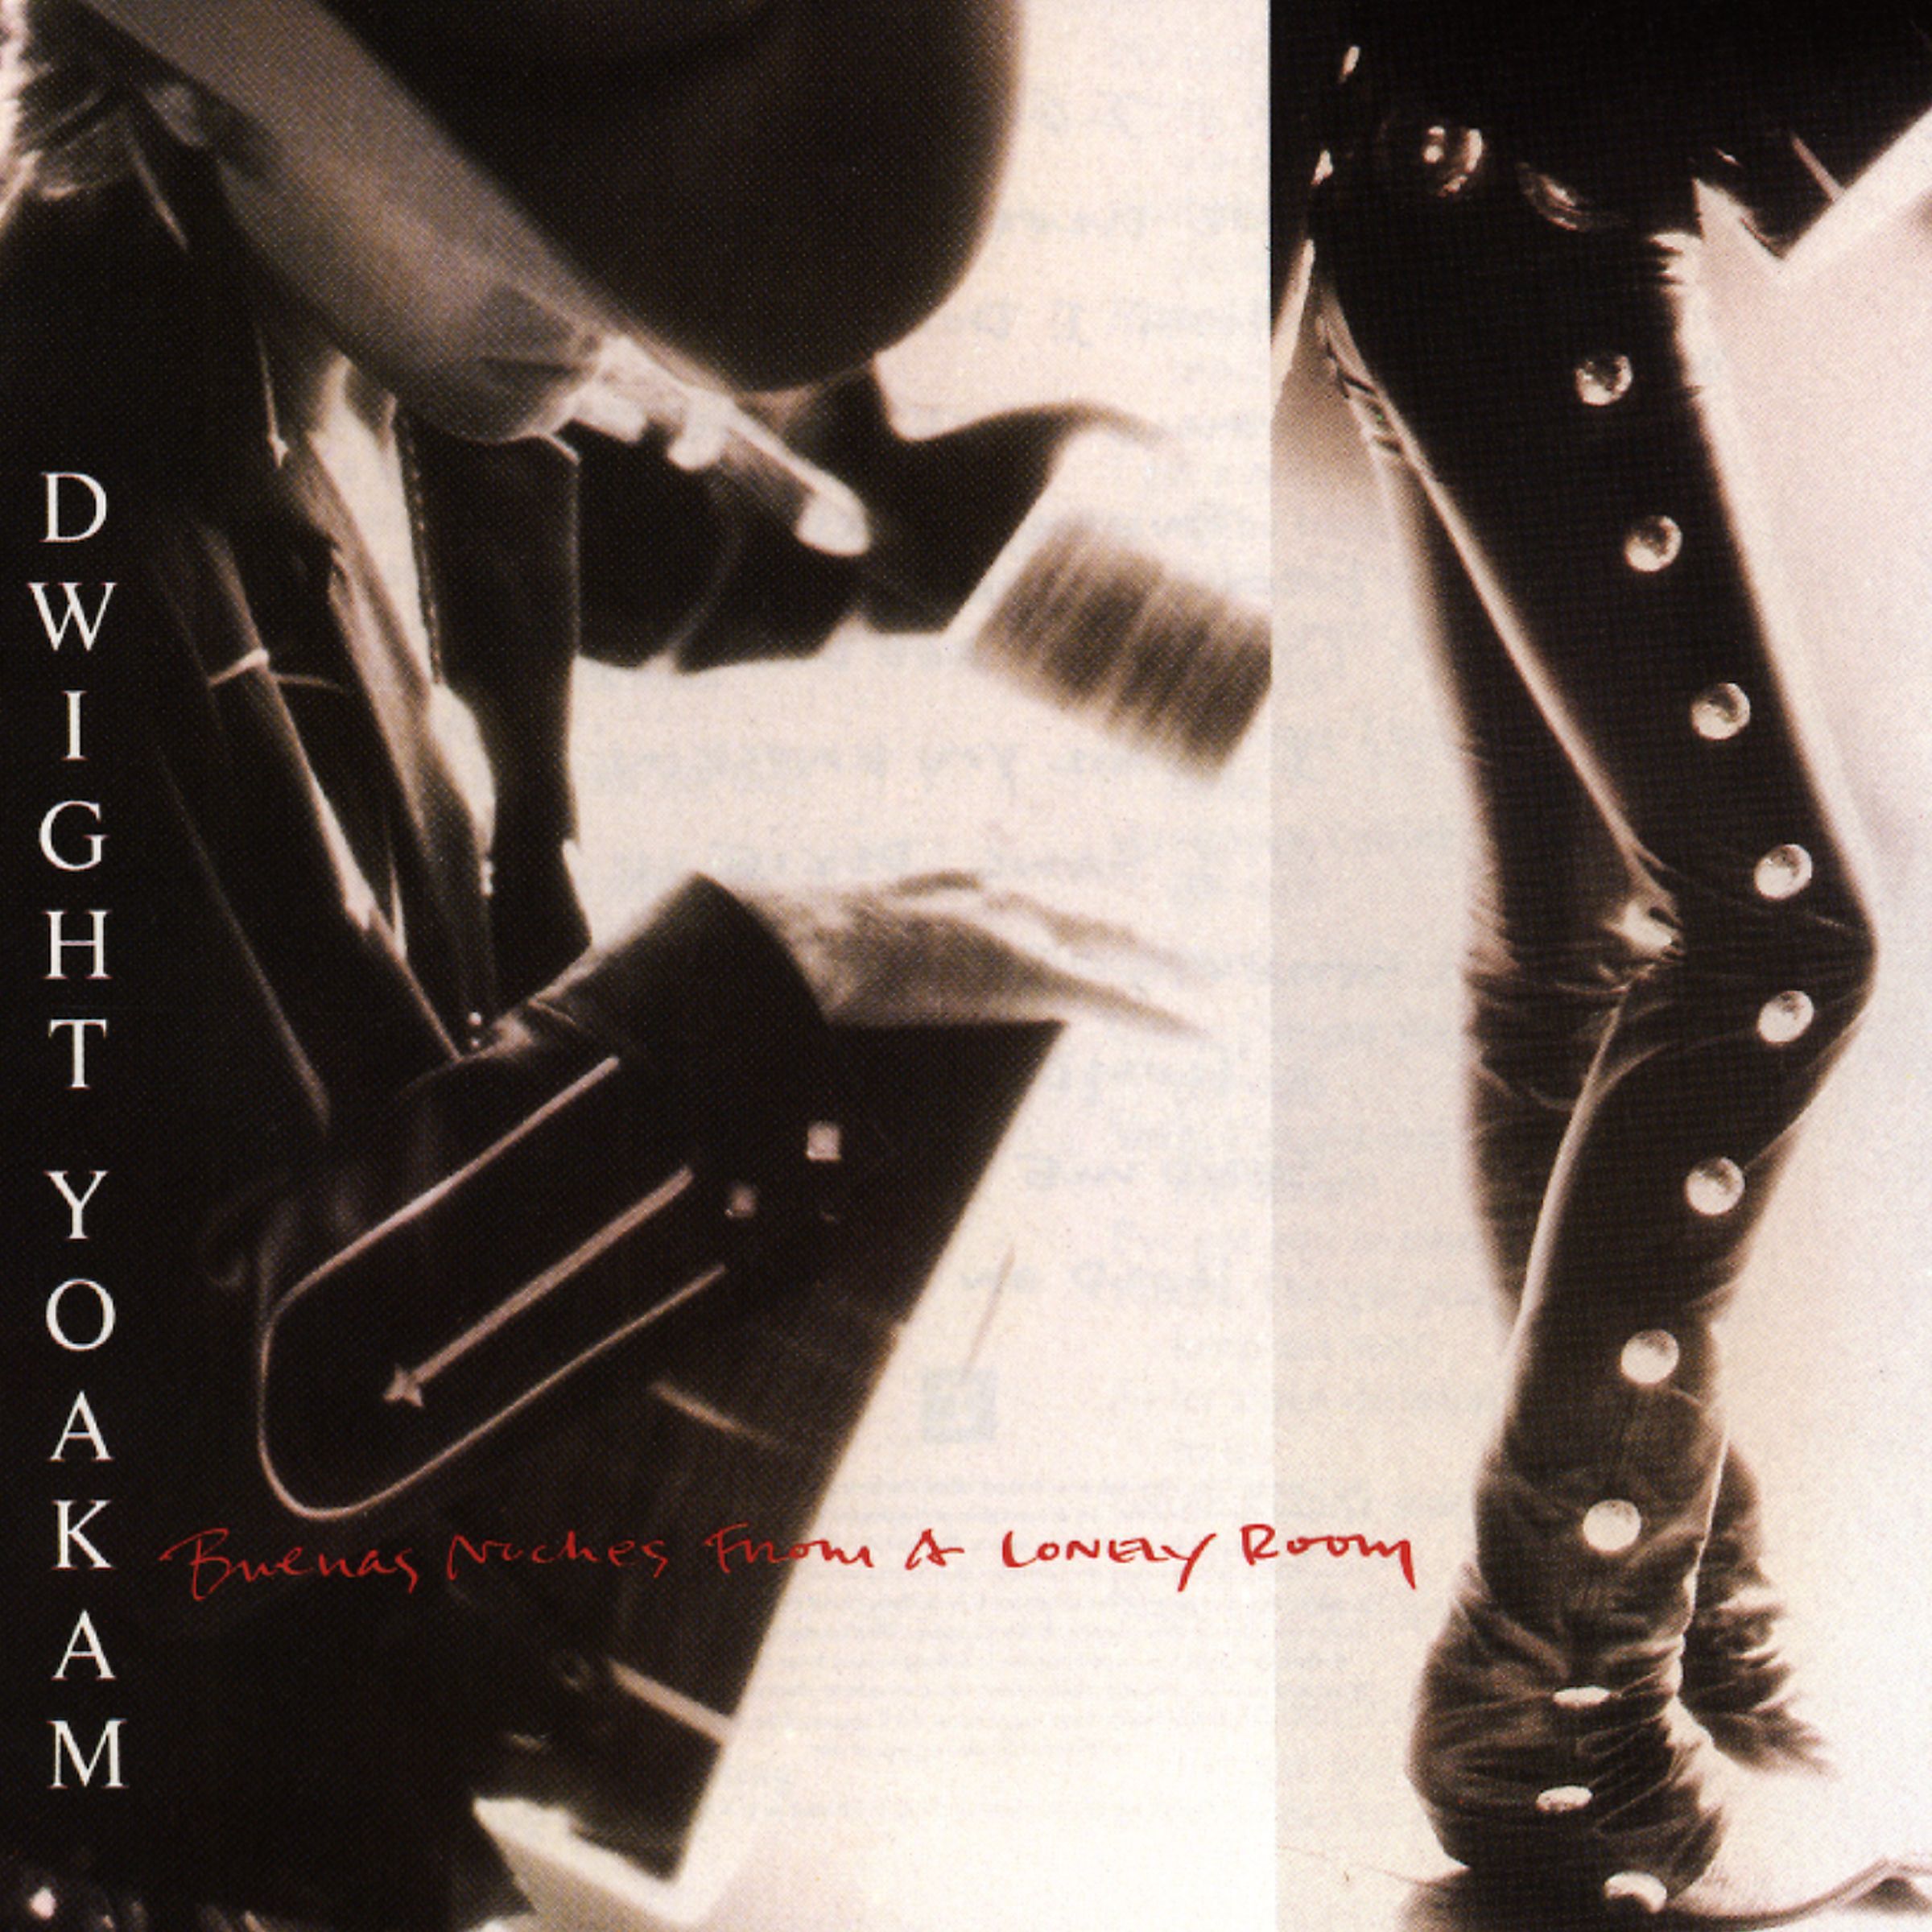 Dwight Yoakam – Buenas Noches From a Lonely Room